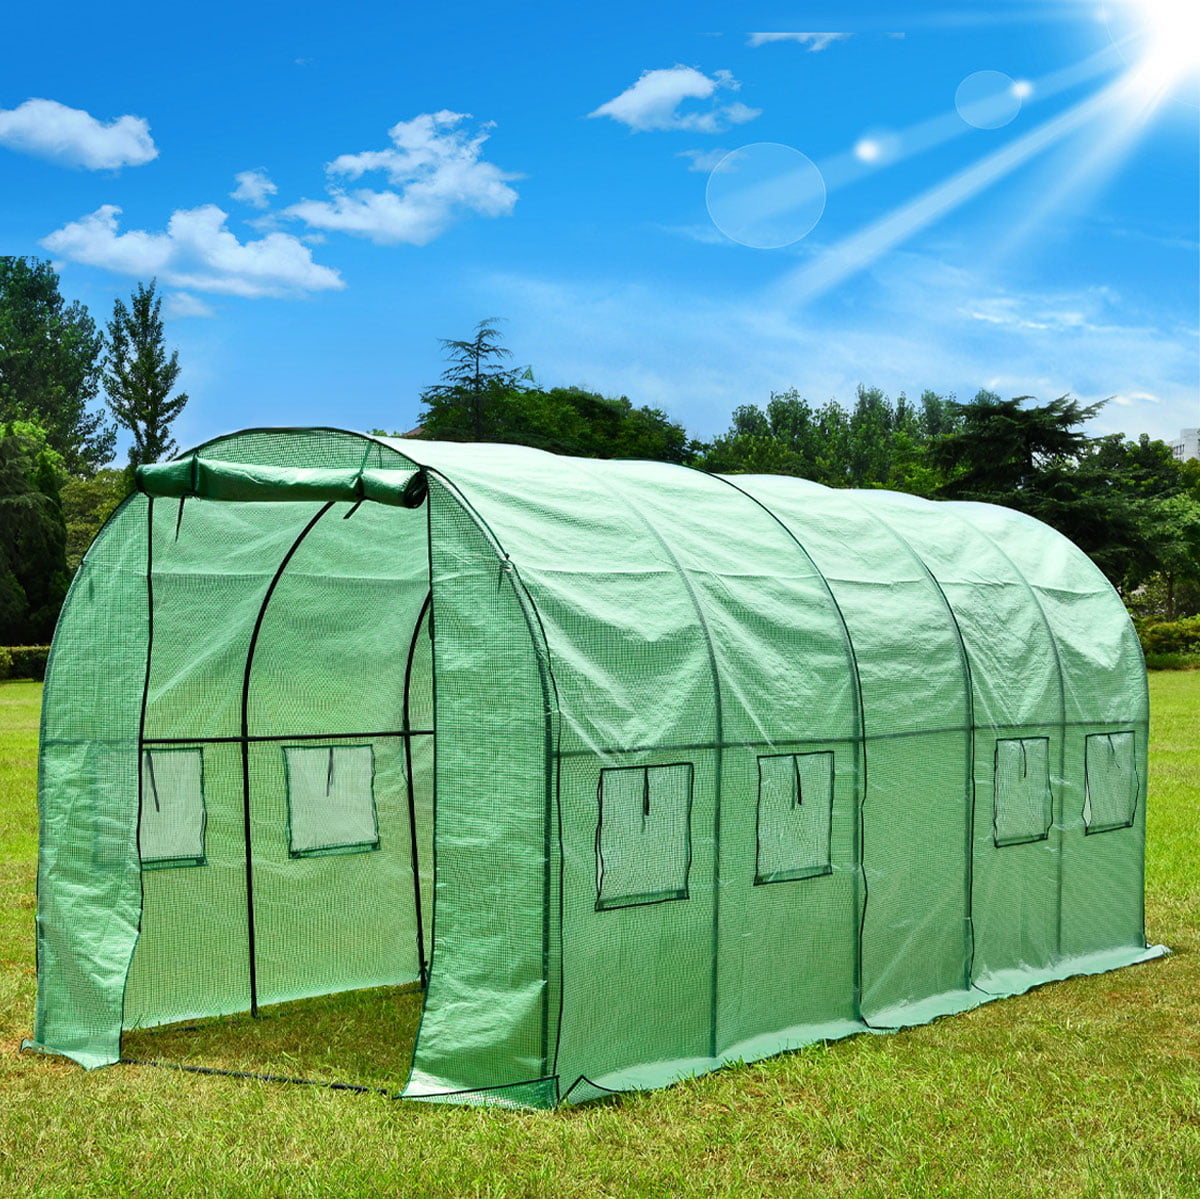 Greenhouse Walk in Portable Hot Green House Plant Sheds Winter Gardening 10 x 7 x 7